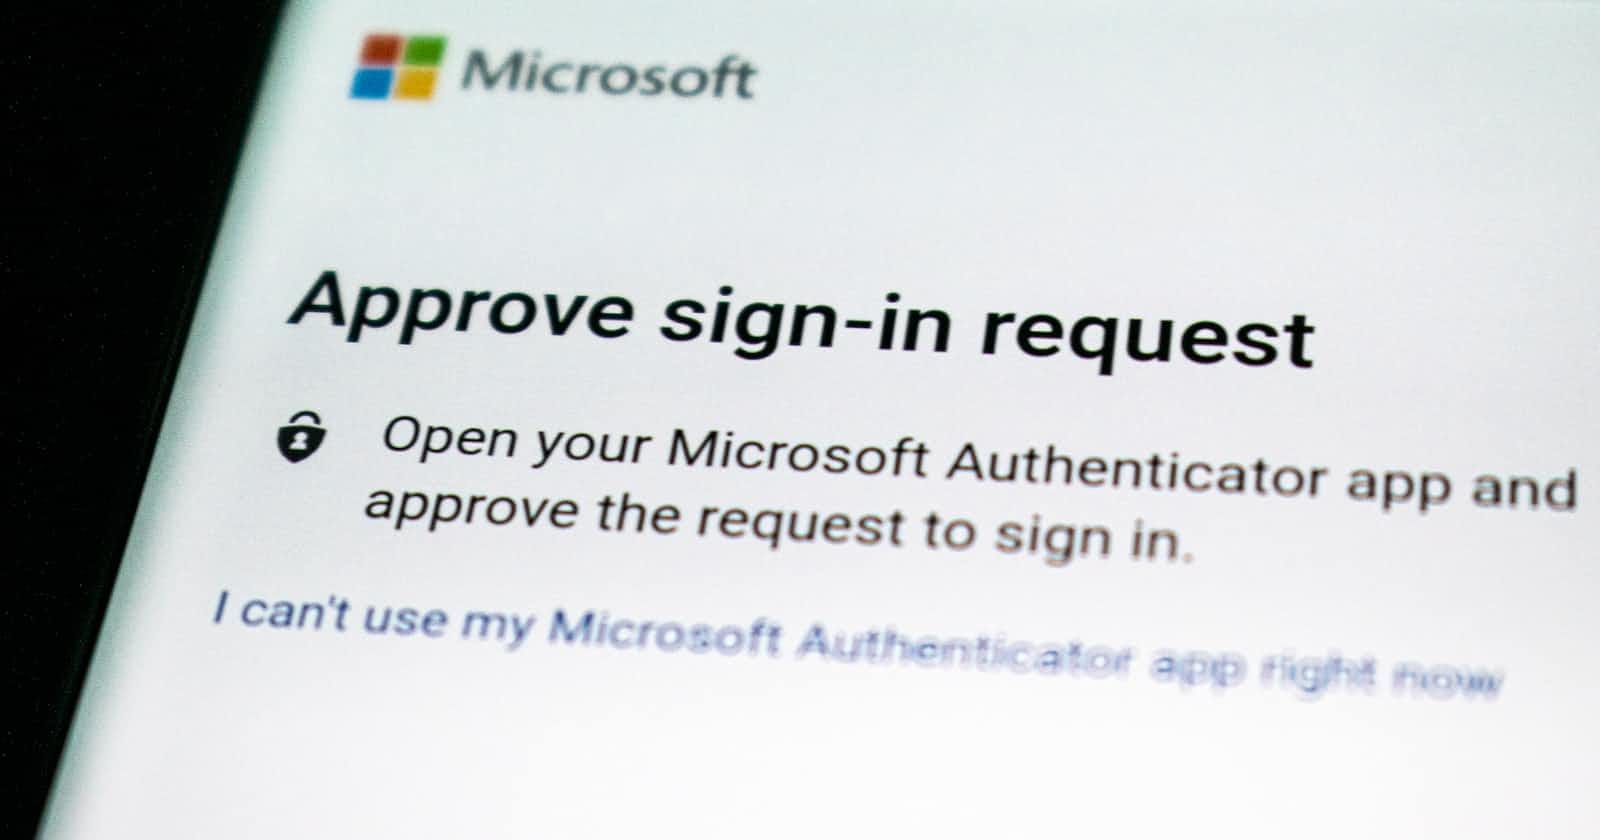 Configuring Microsoft authentication for a Microsoft Power Pages website